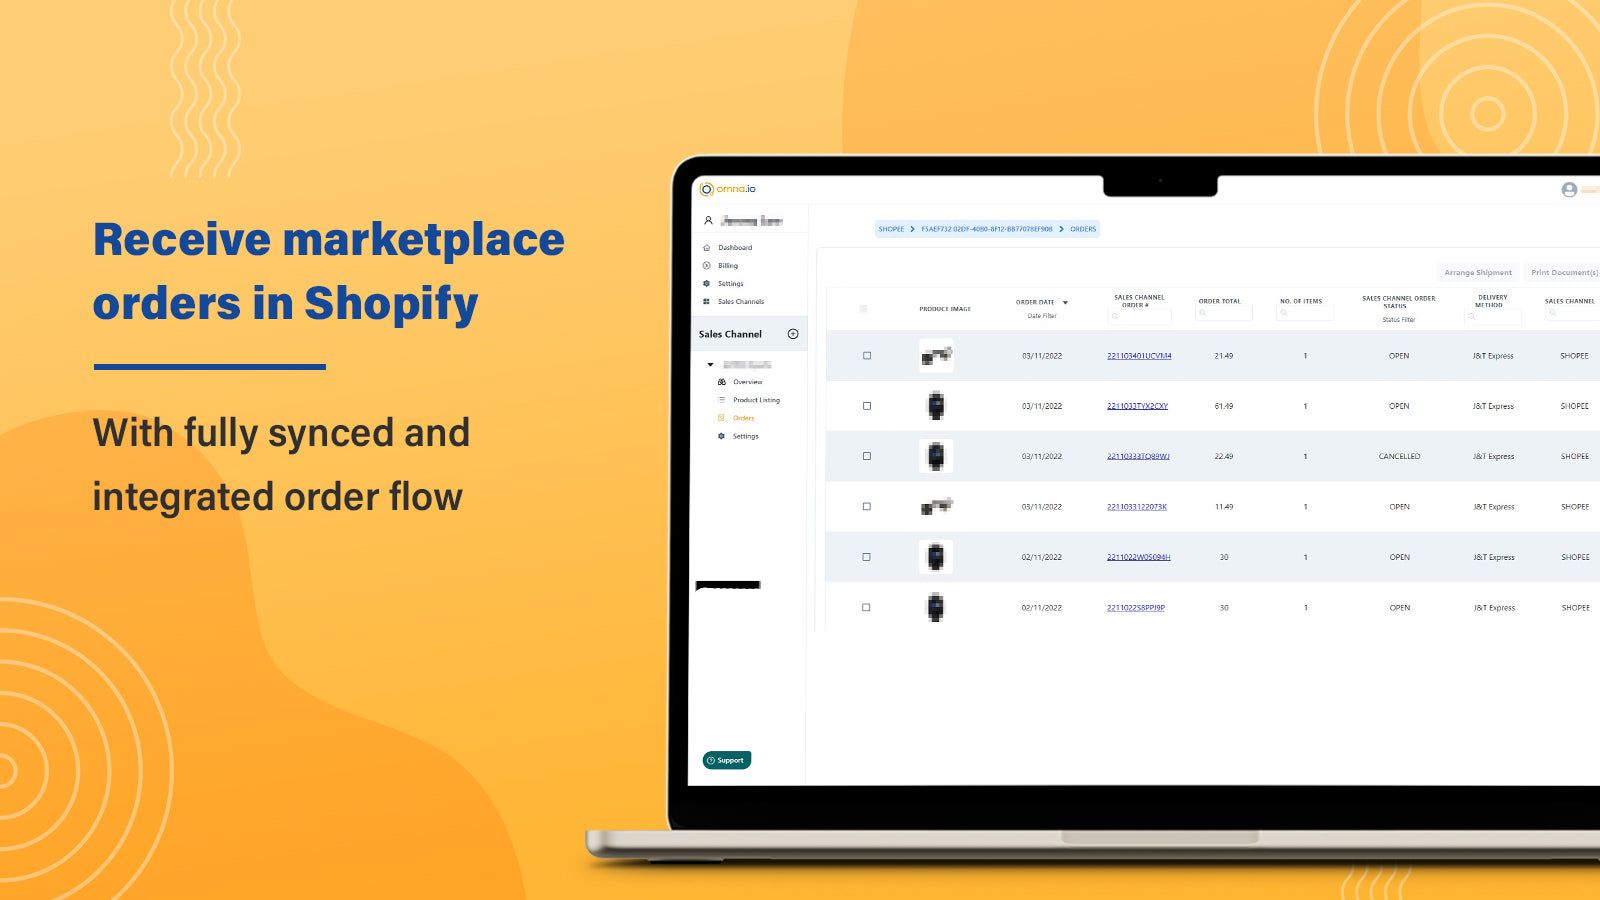 Receive marketplace orders in Shopify